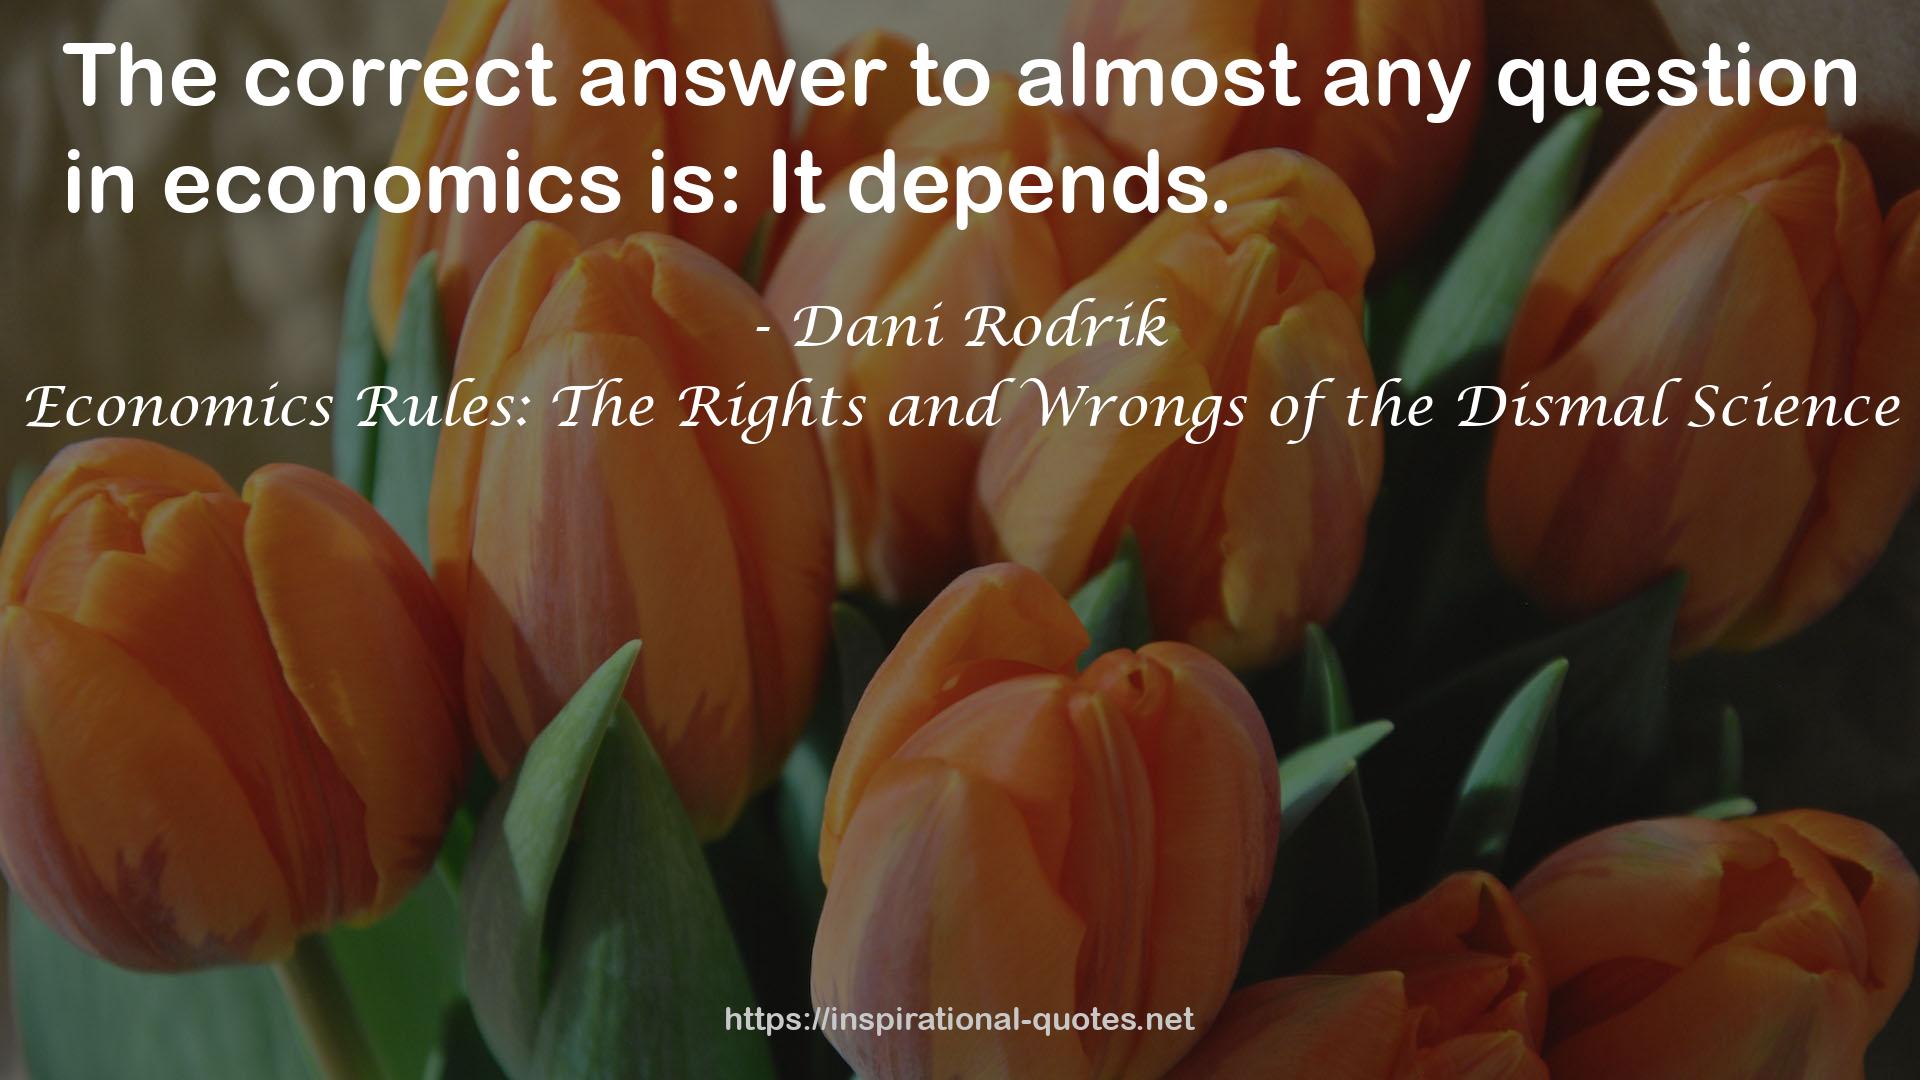 Economics Rules: The Rights and Wrongs of the Dismal Science QUOTES